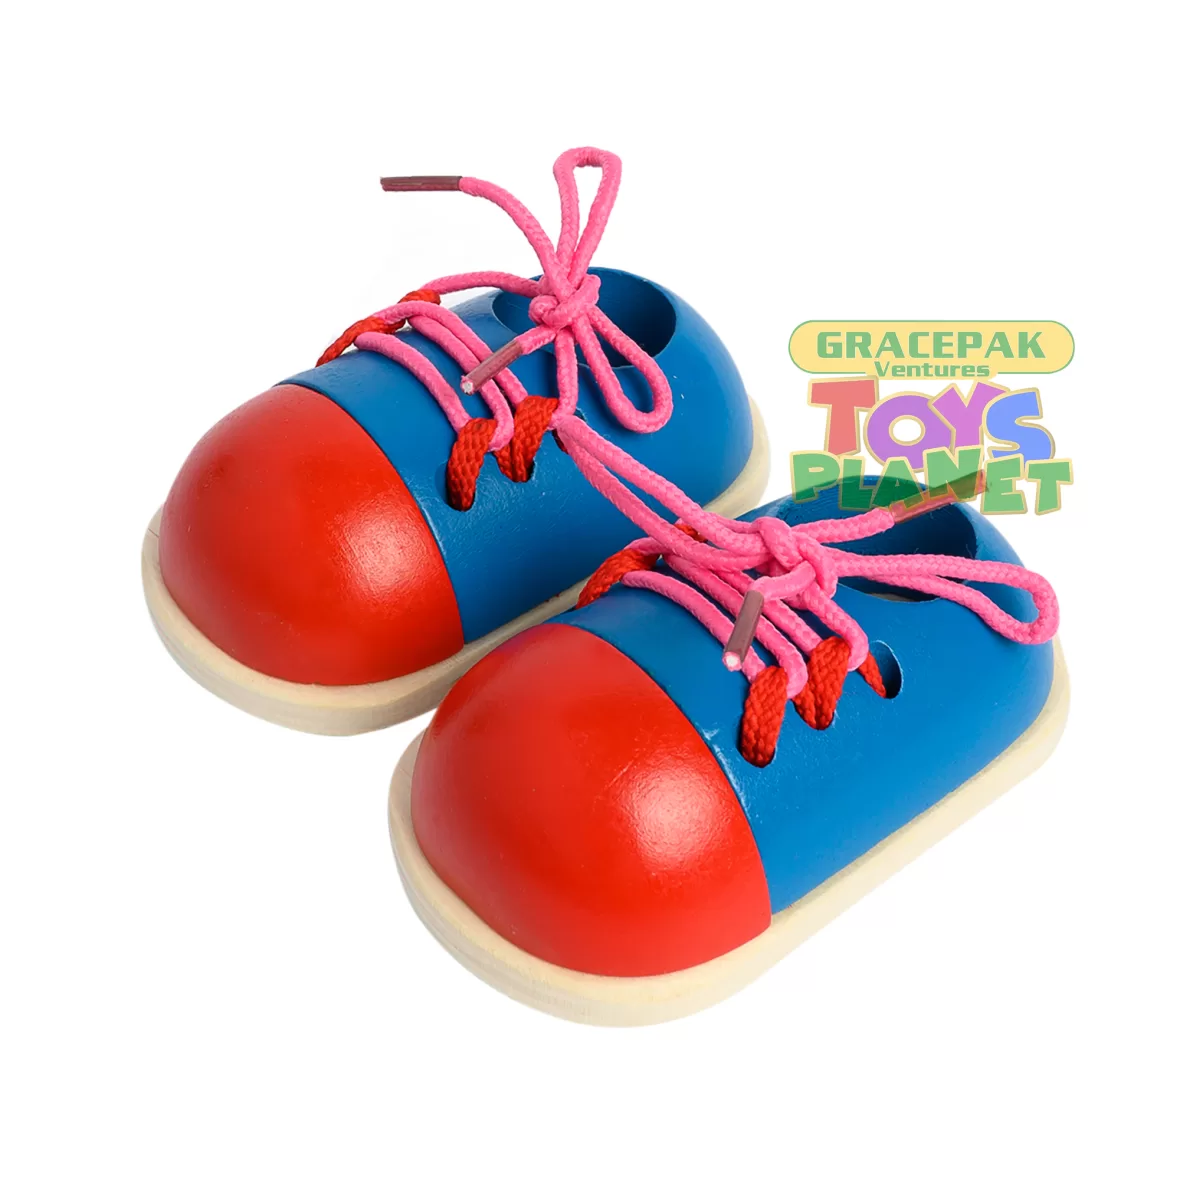 Wooden Shoe Lacing Toy